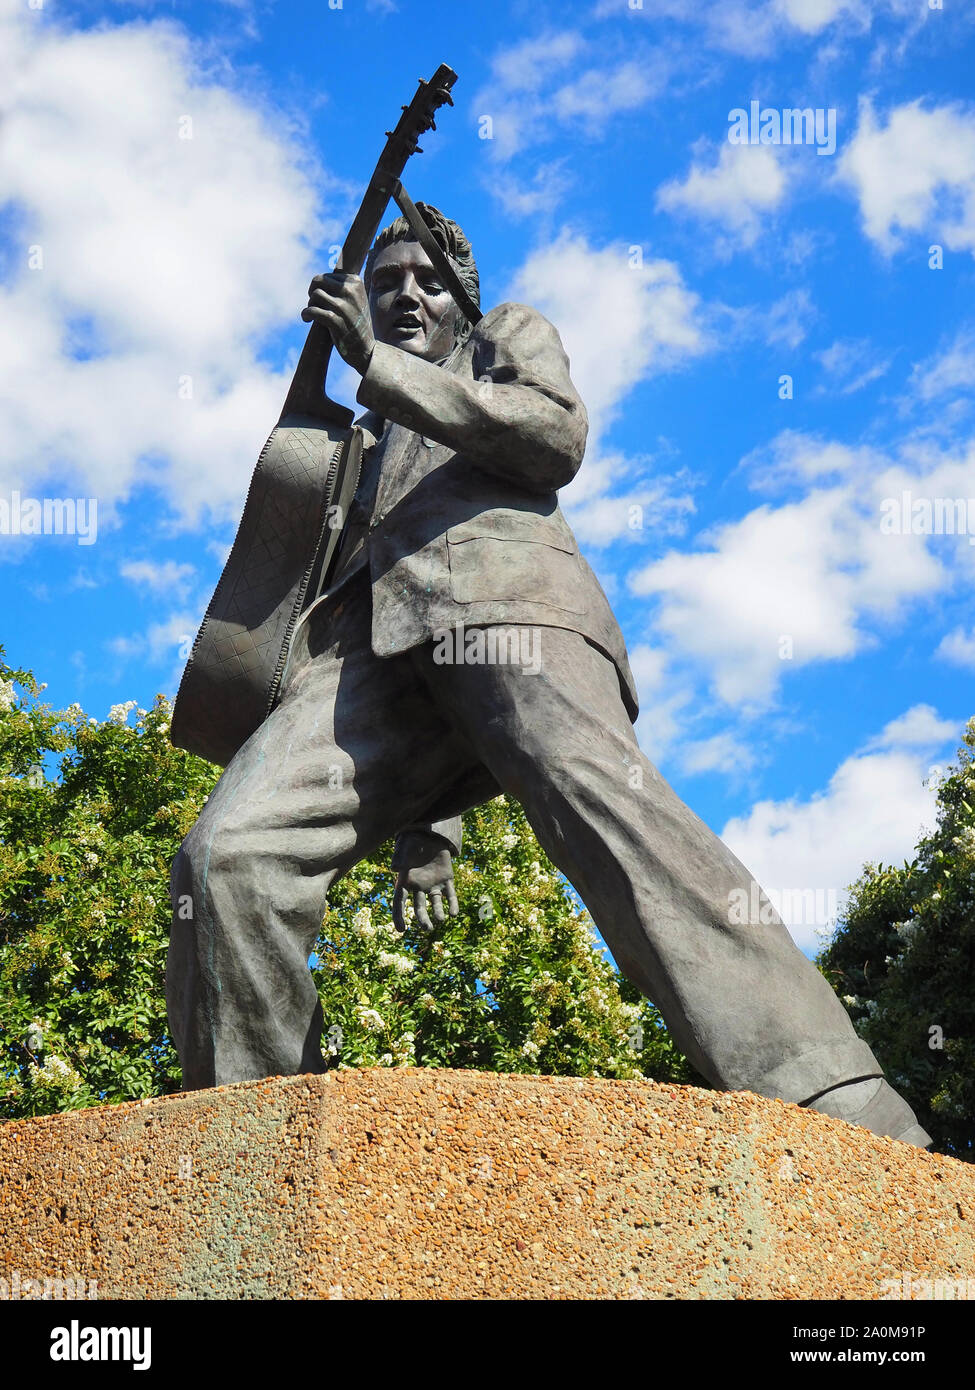 MEMPHIS, TENNESEE - JULY 23, 2019: A bronze statue of Elvis Presley playing his guitar, erected by scuptor Andrea Lugar in 1997, depicts the musician Stock Photo